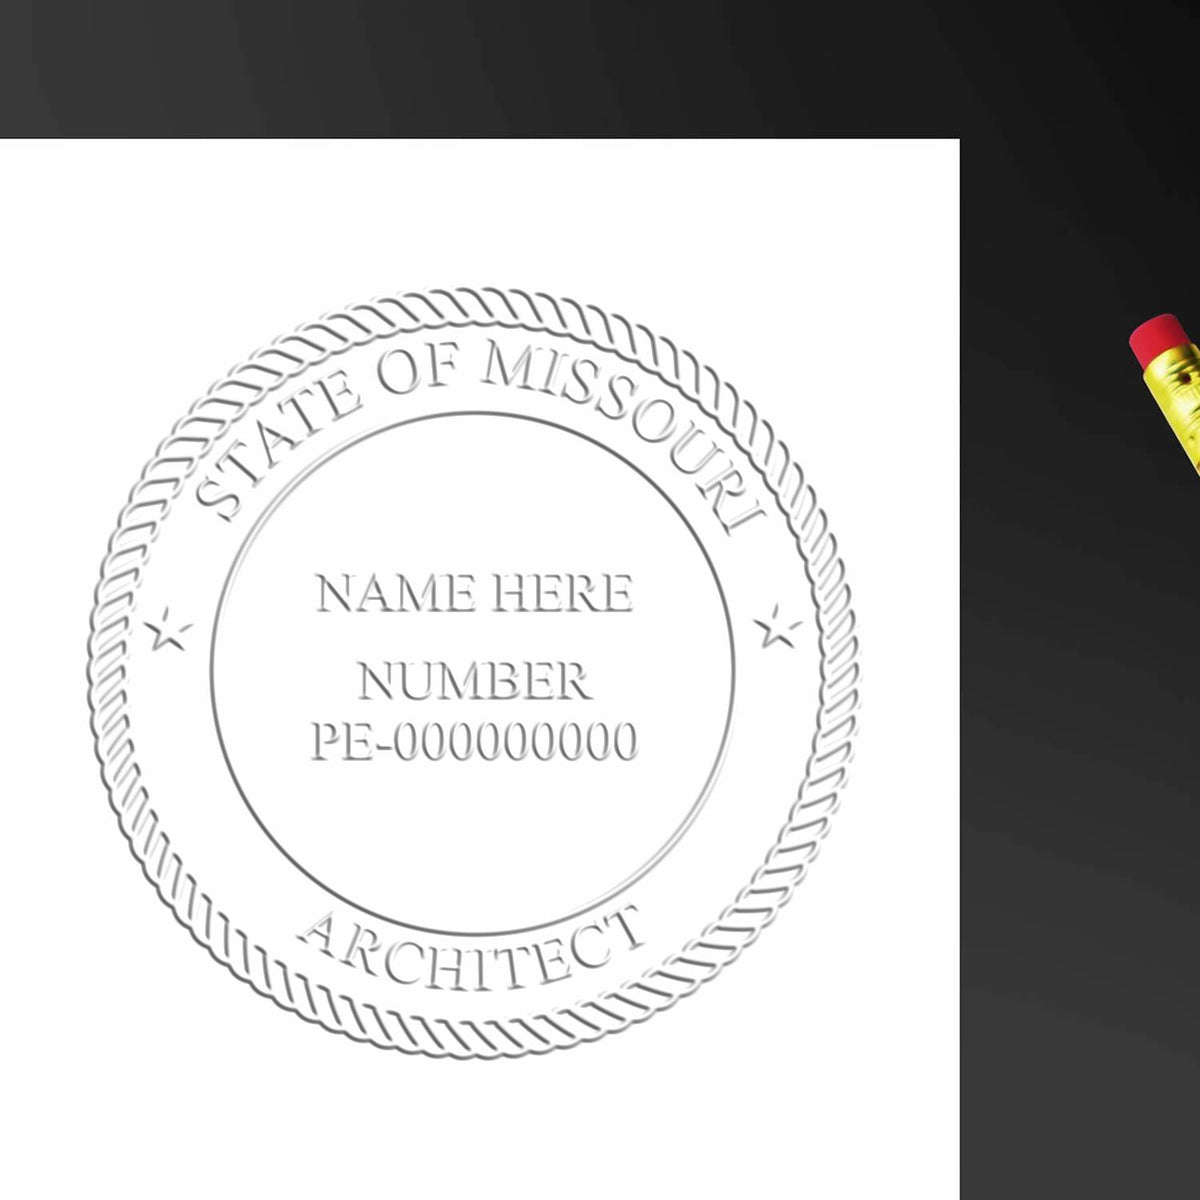 A lifestyle photo showing a stamped image of the Missouri Desk Architect Embossing Seal on a piece of paper